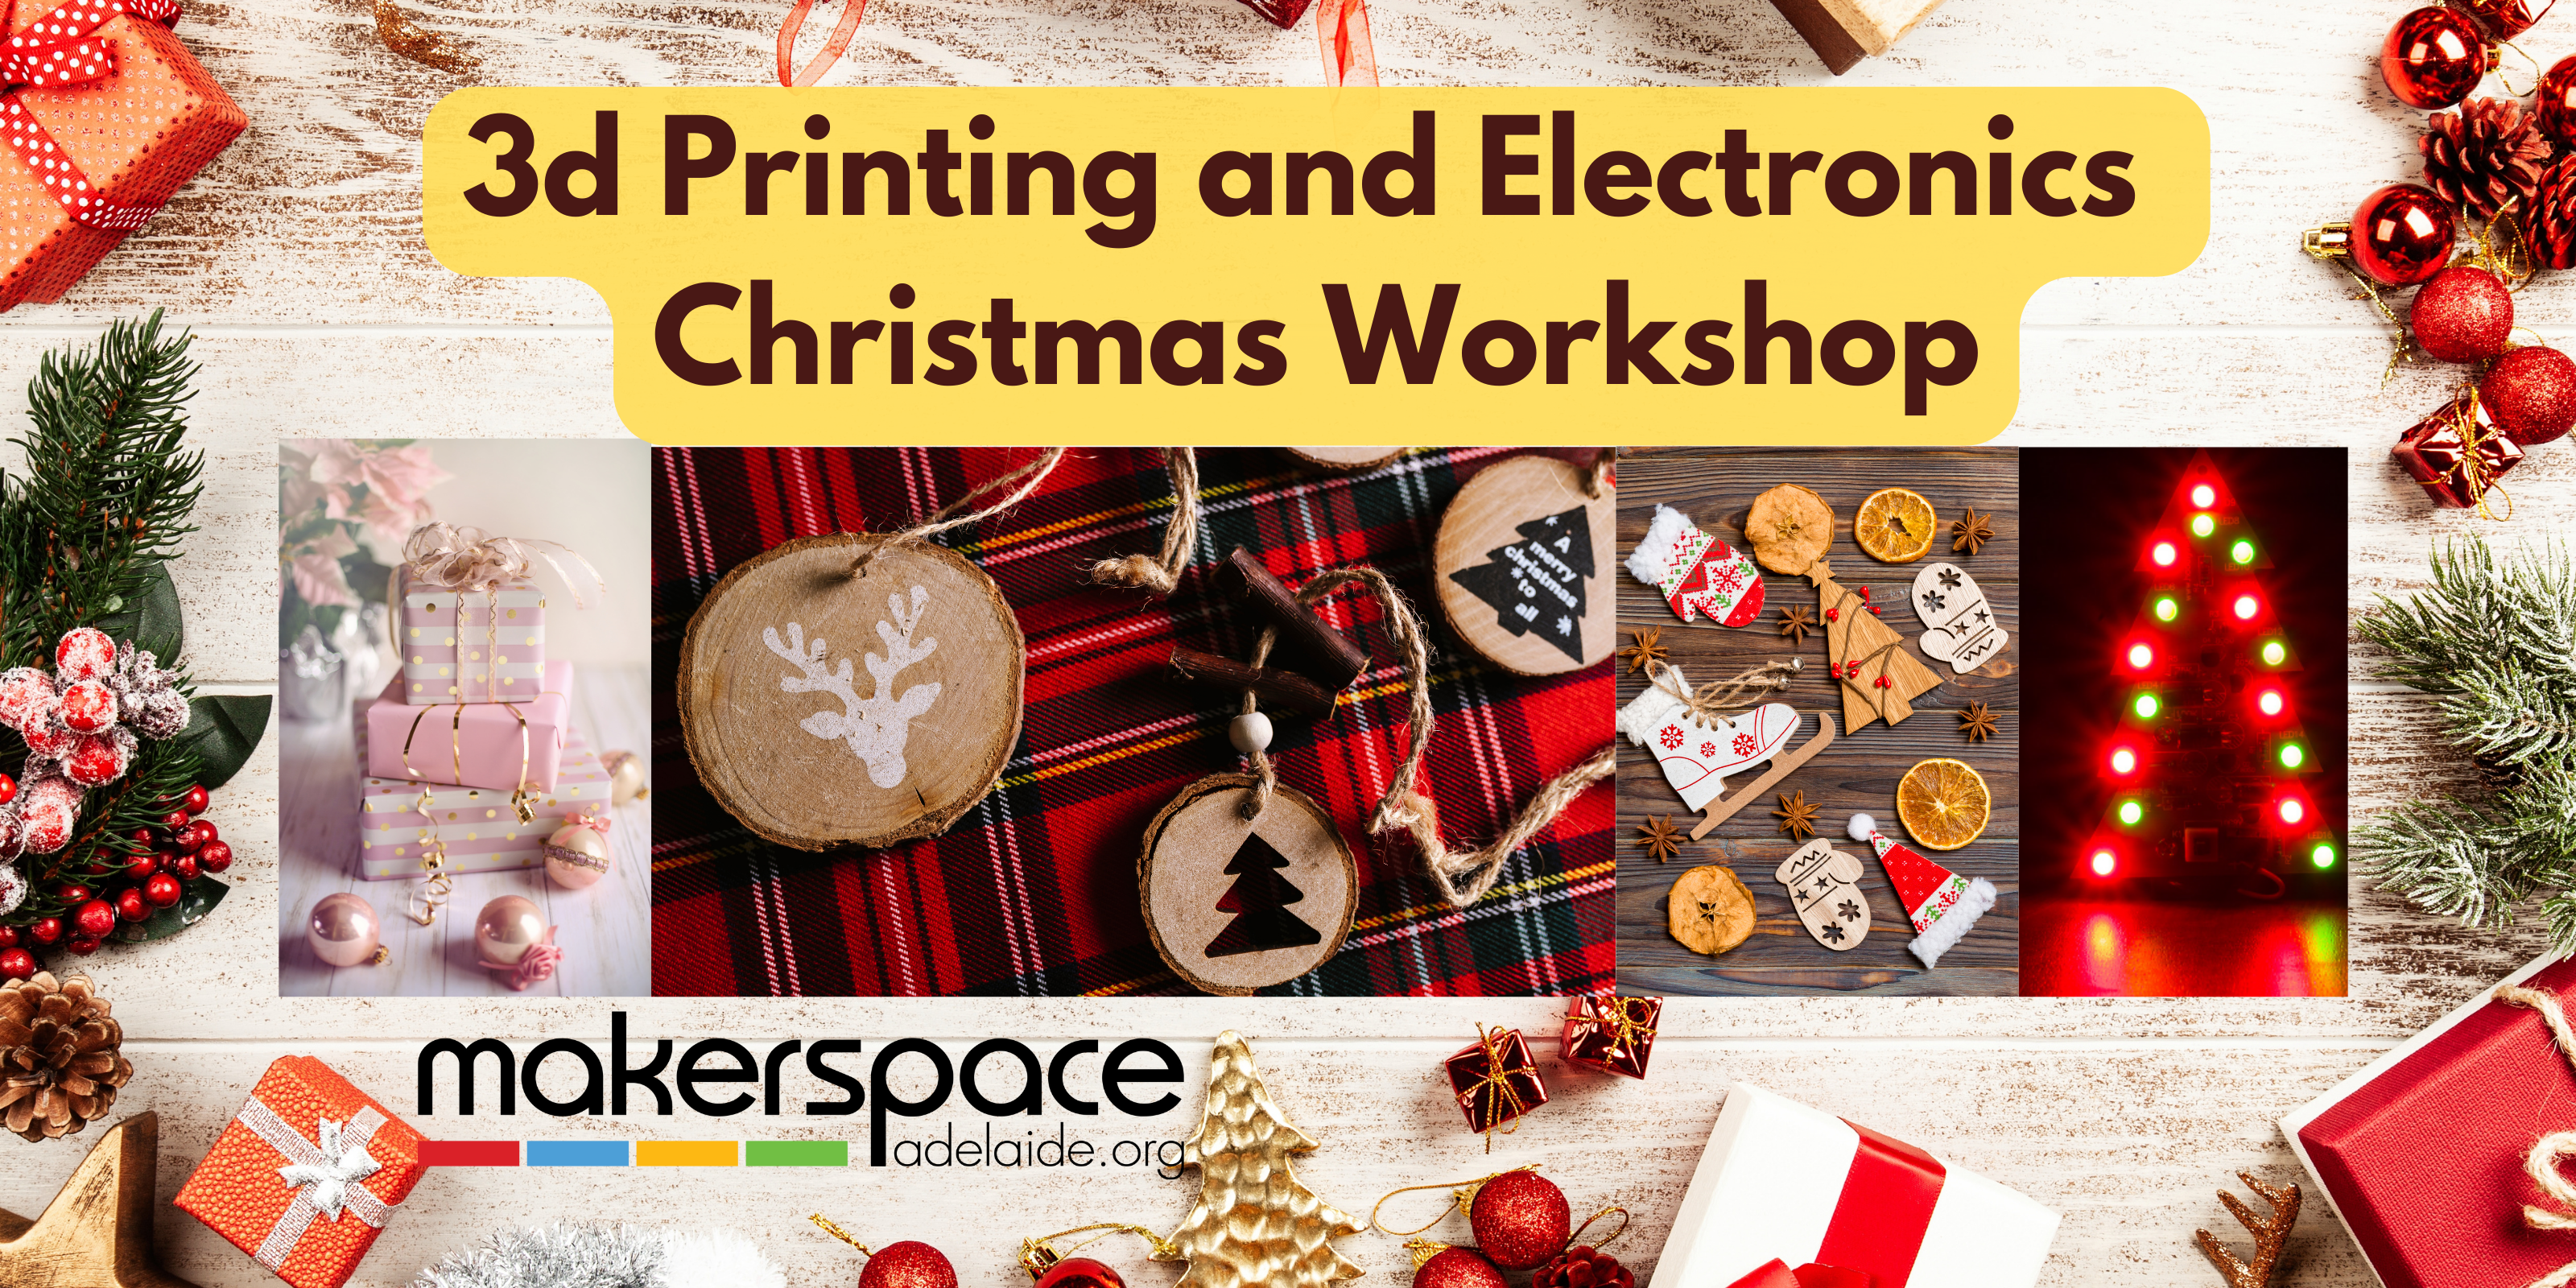 3d Printing and Electronics Christmas Workshop